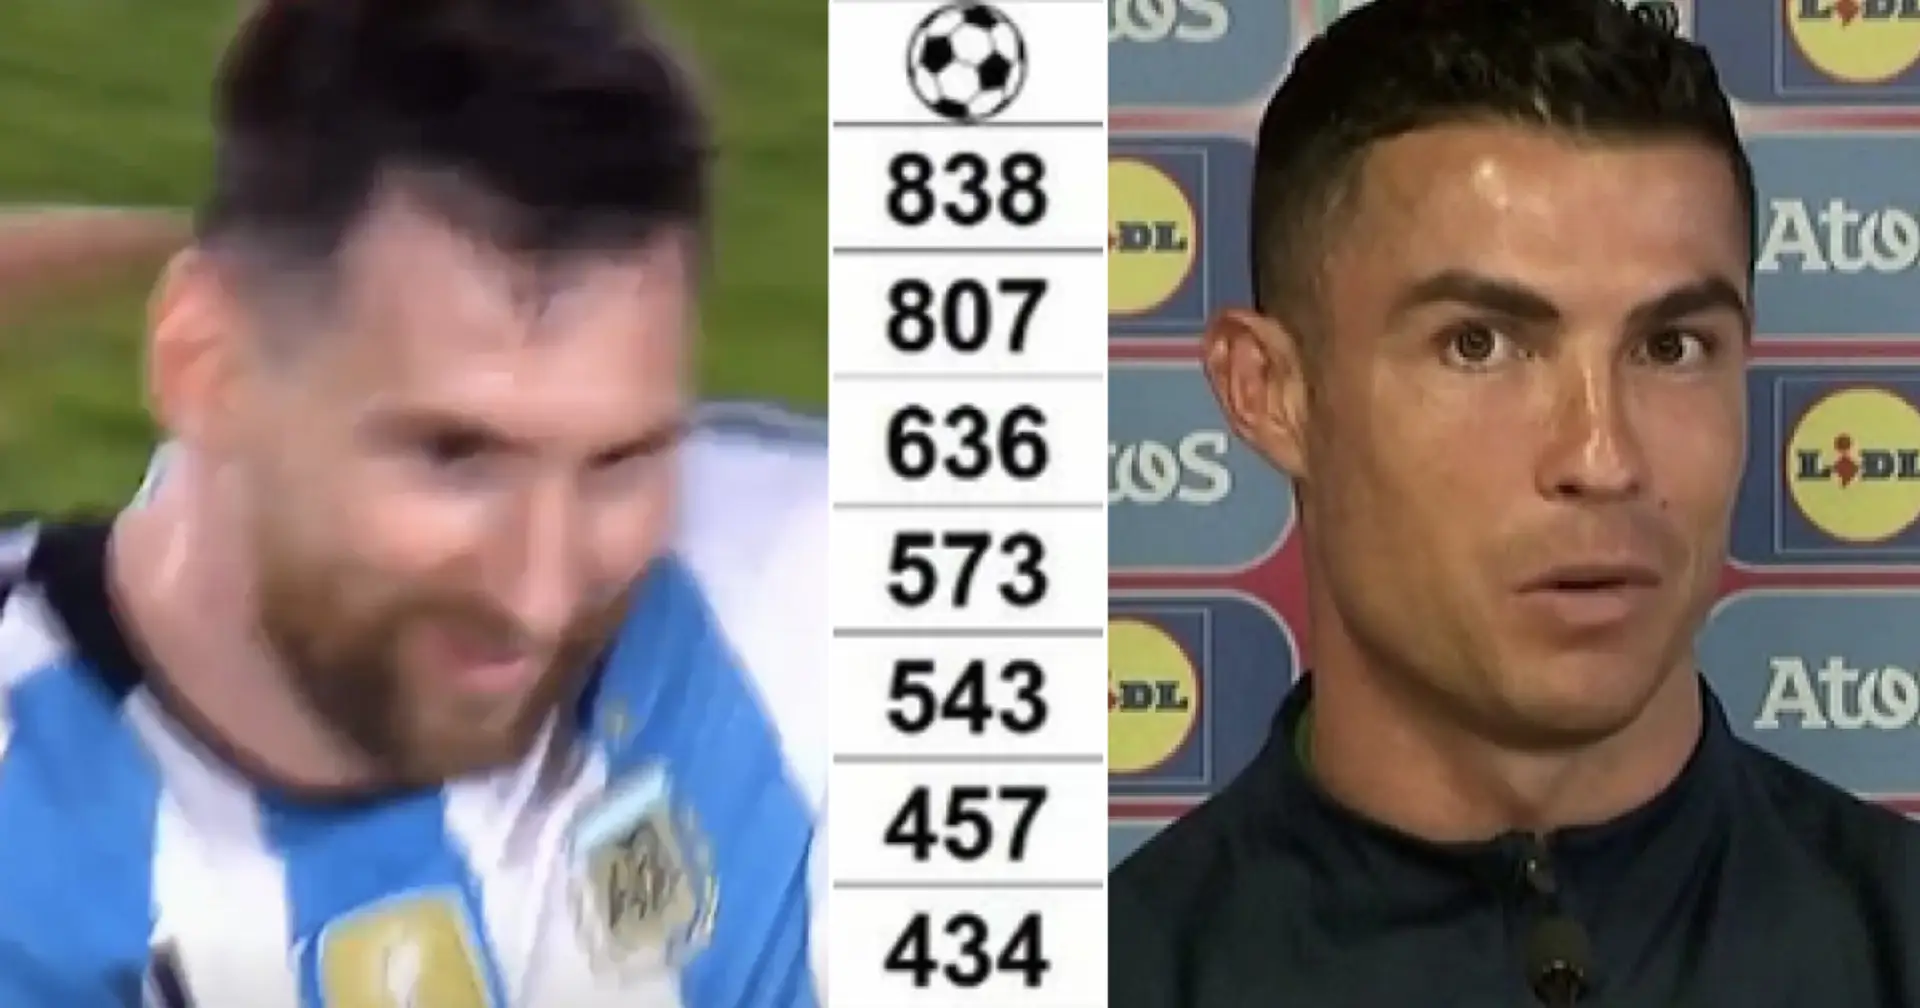 Top 10 goalscorers in 21st century: 3 Barca legends in, Messi not far from Ronaldo